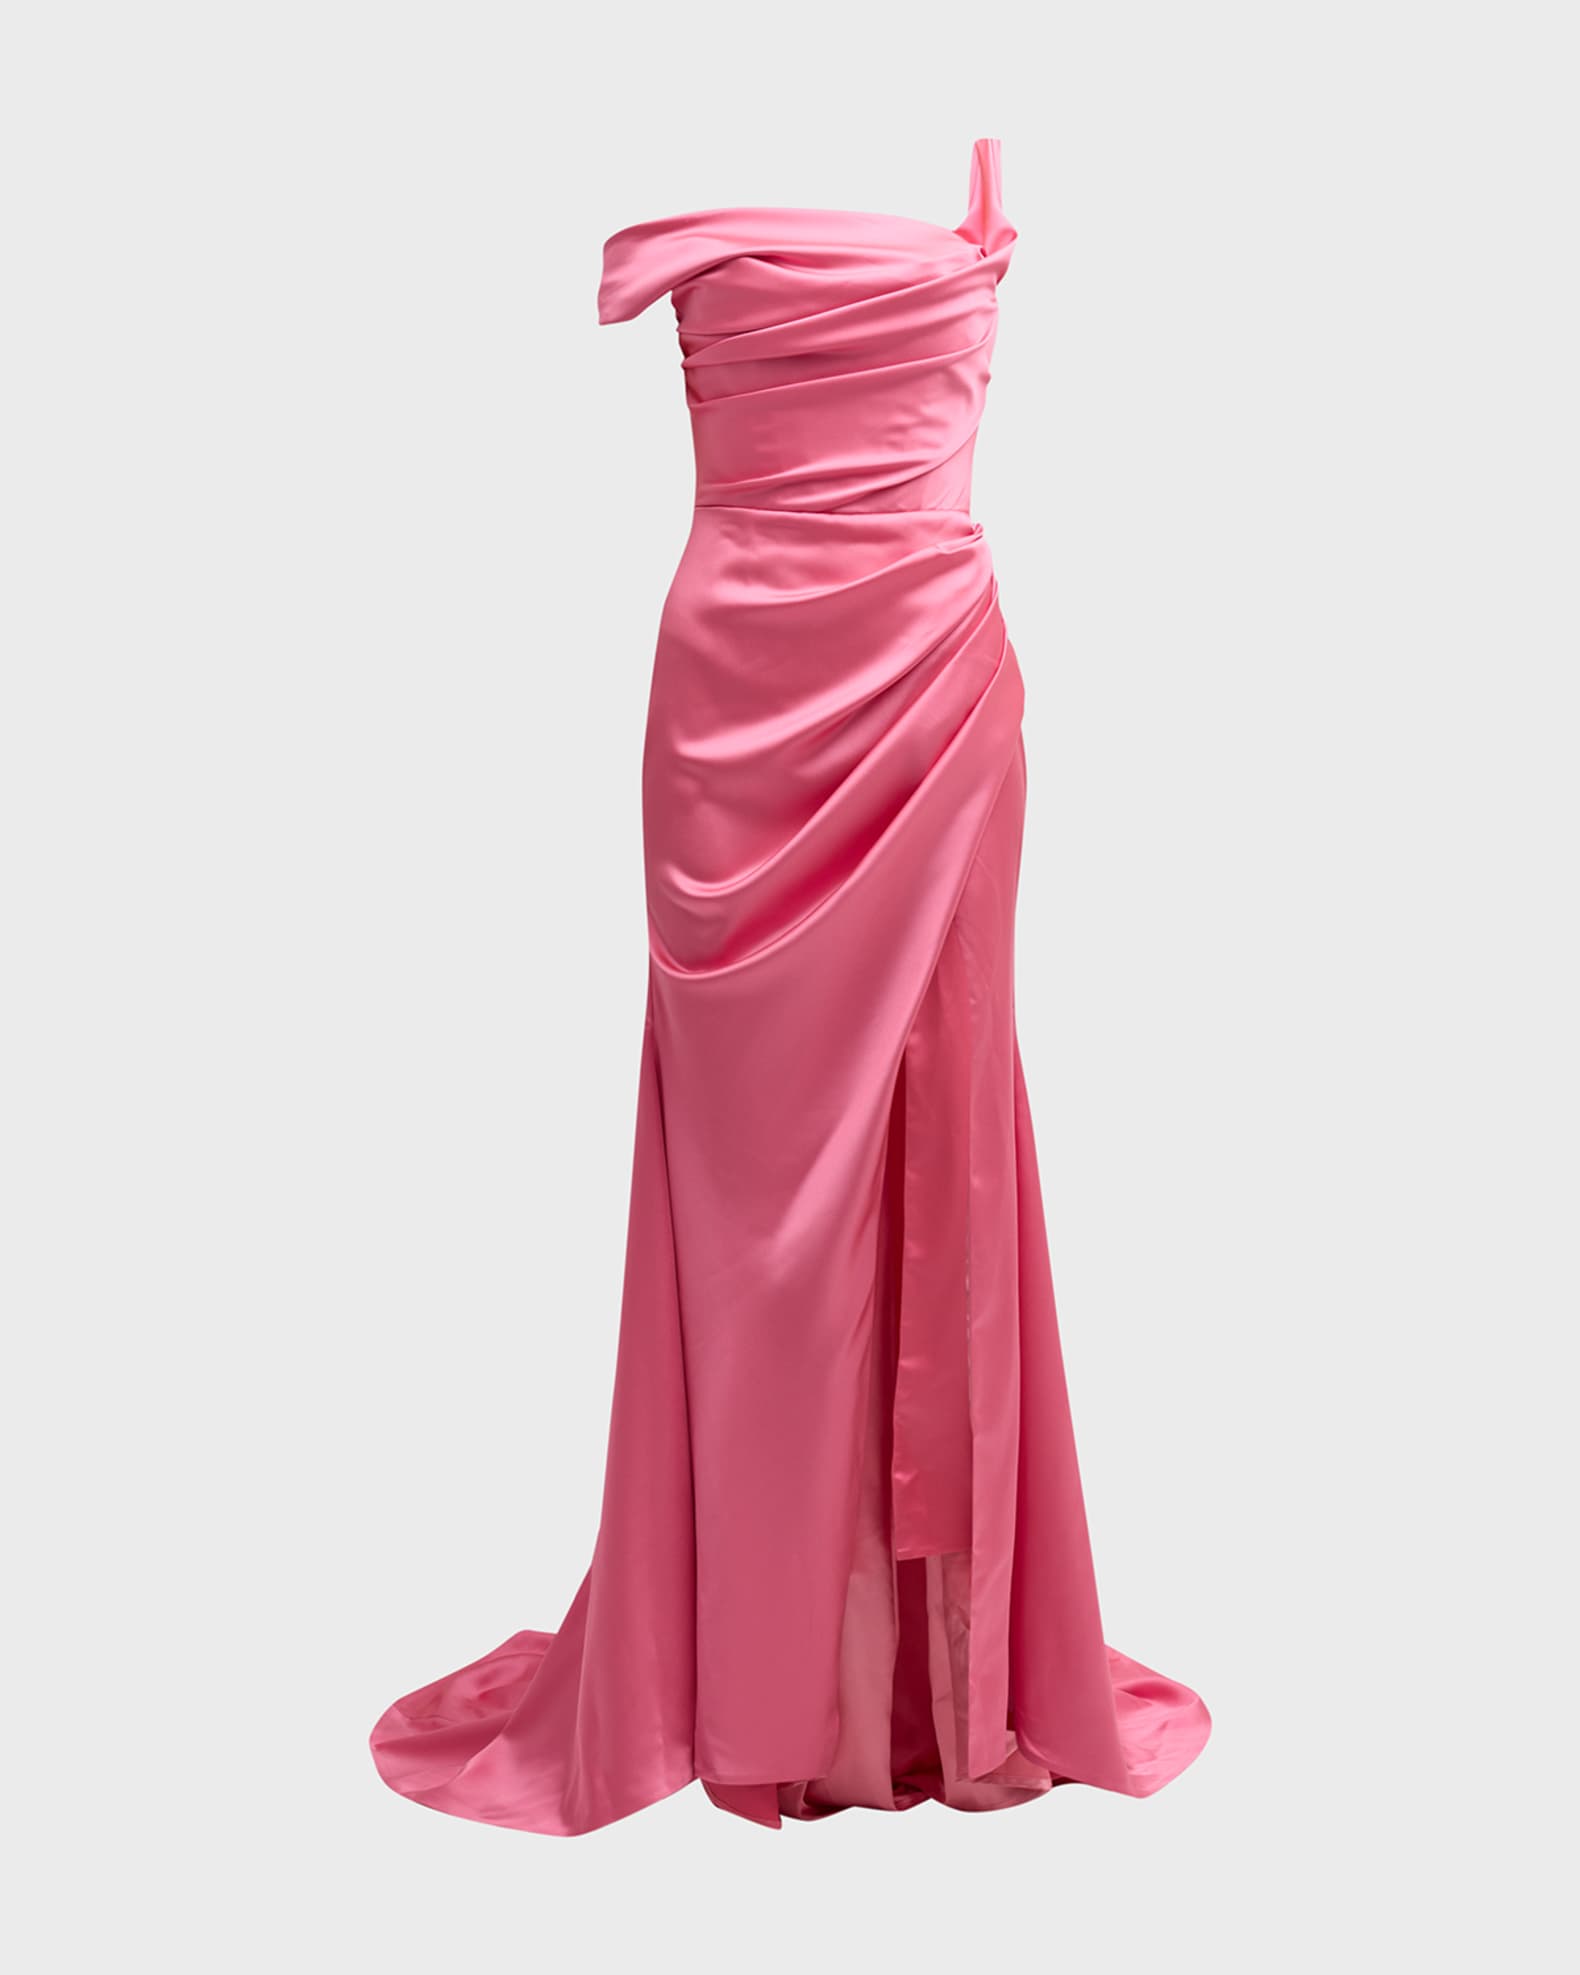 GIGII'S Rosario Ruched One-Shoulder A-Line Gown | Neiman Marcus